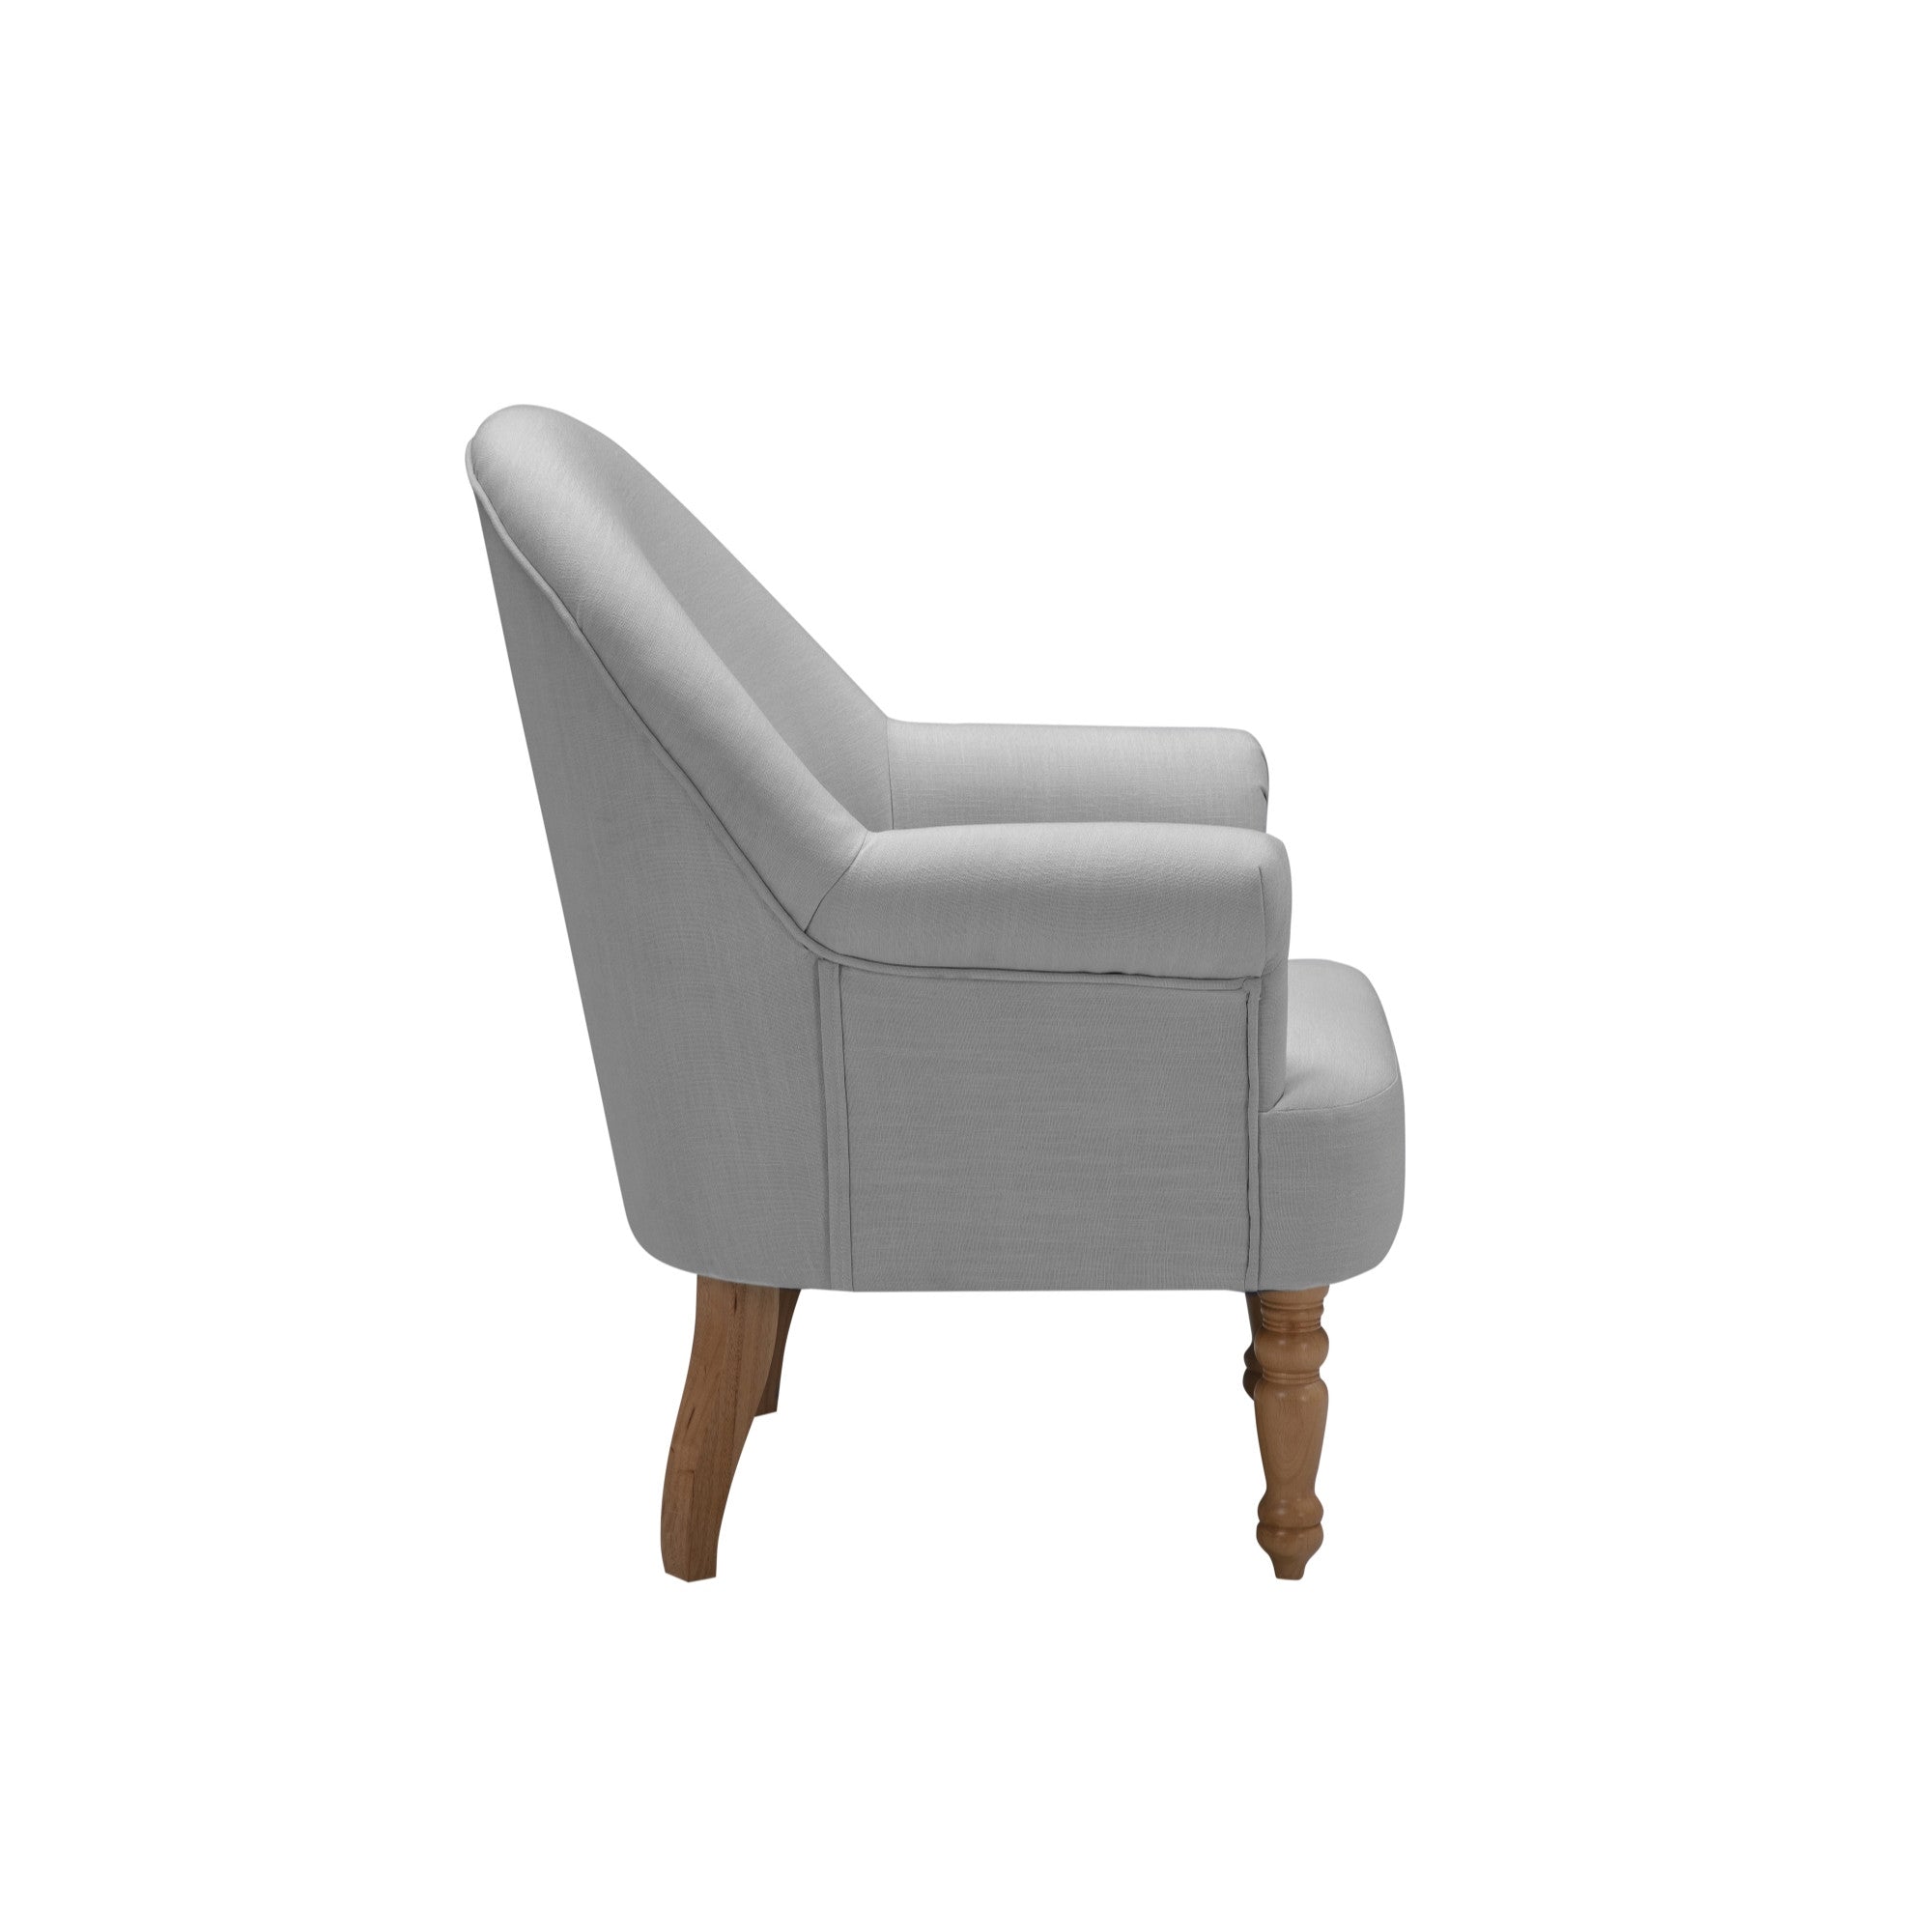 33" Dark Gray And Brown Linen Arm Chair